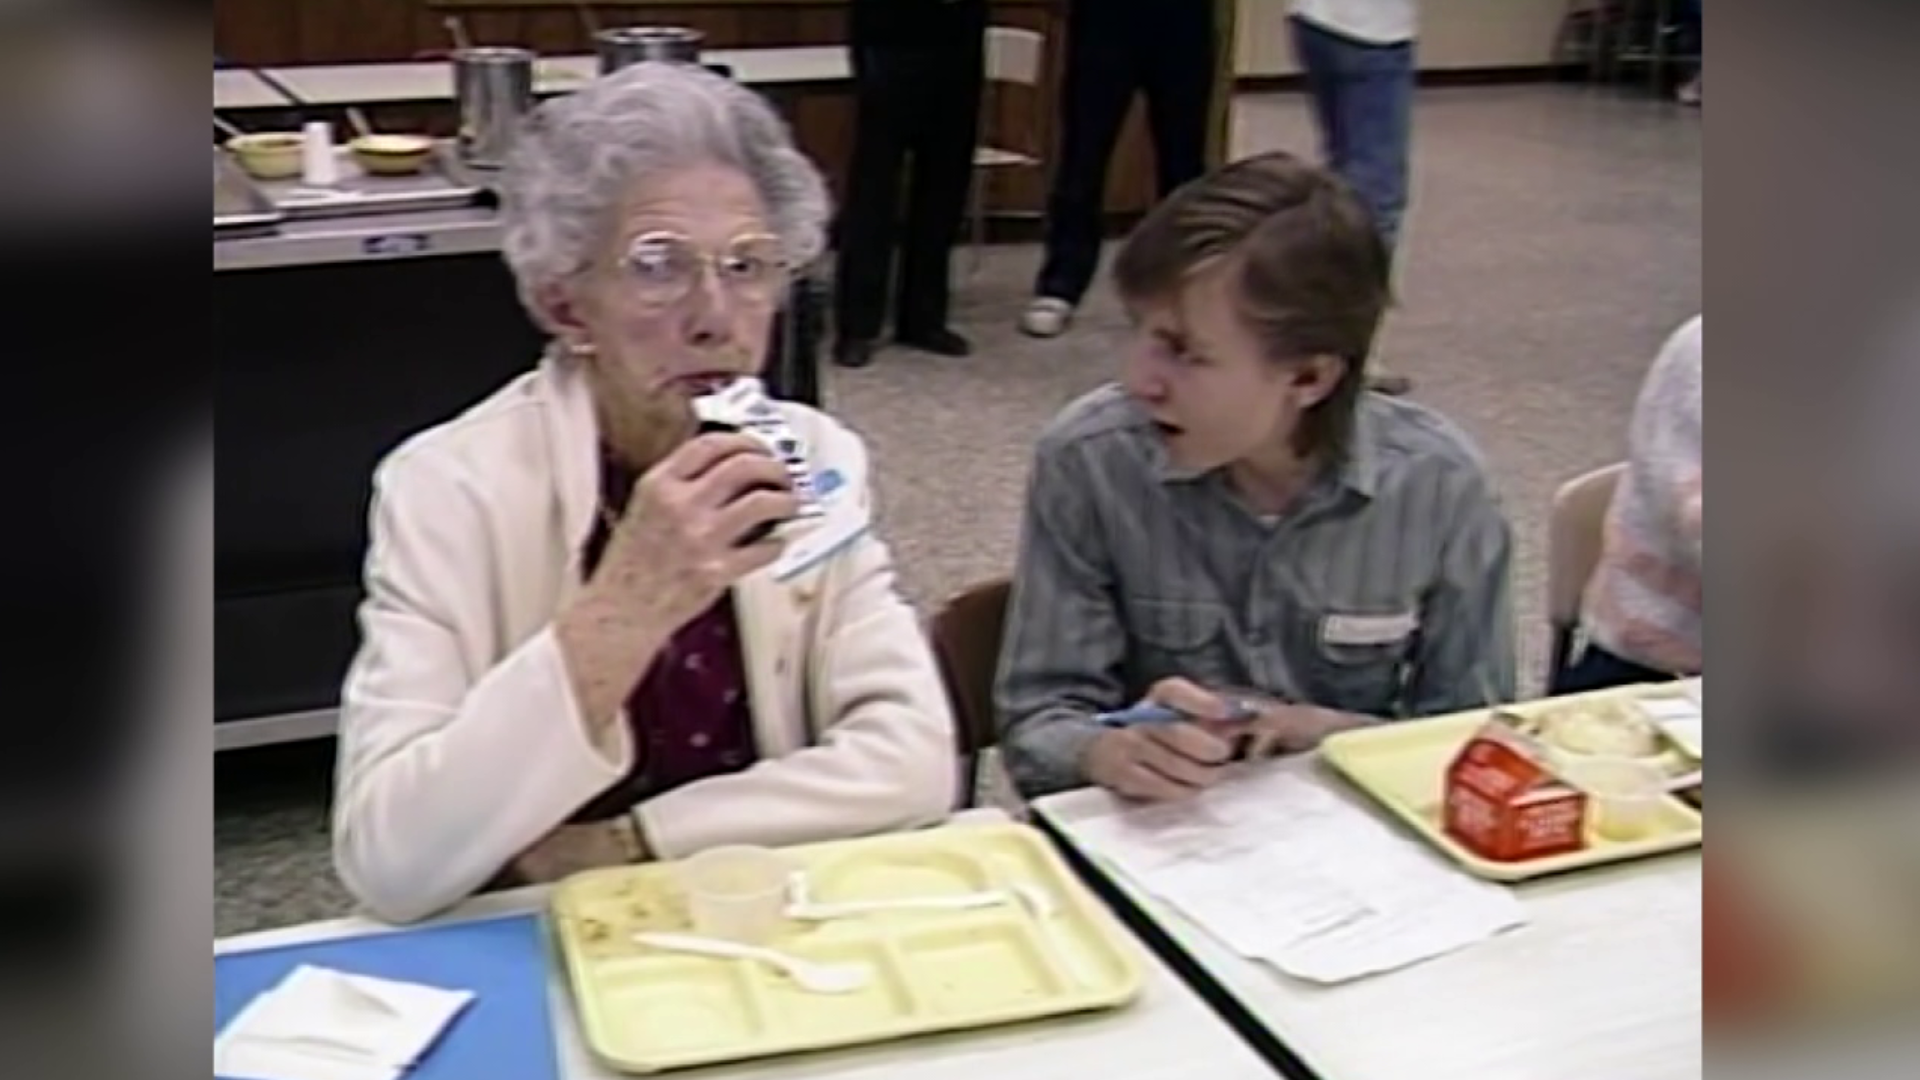 We take a trip to 1989 to an interesting and educational day at Western Wayne High School.